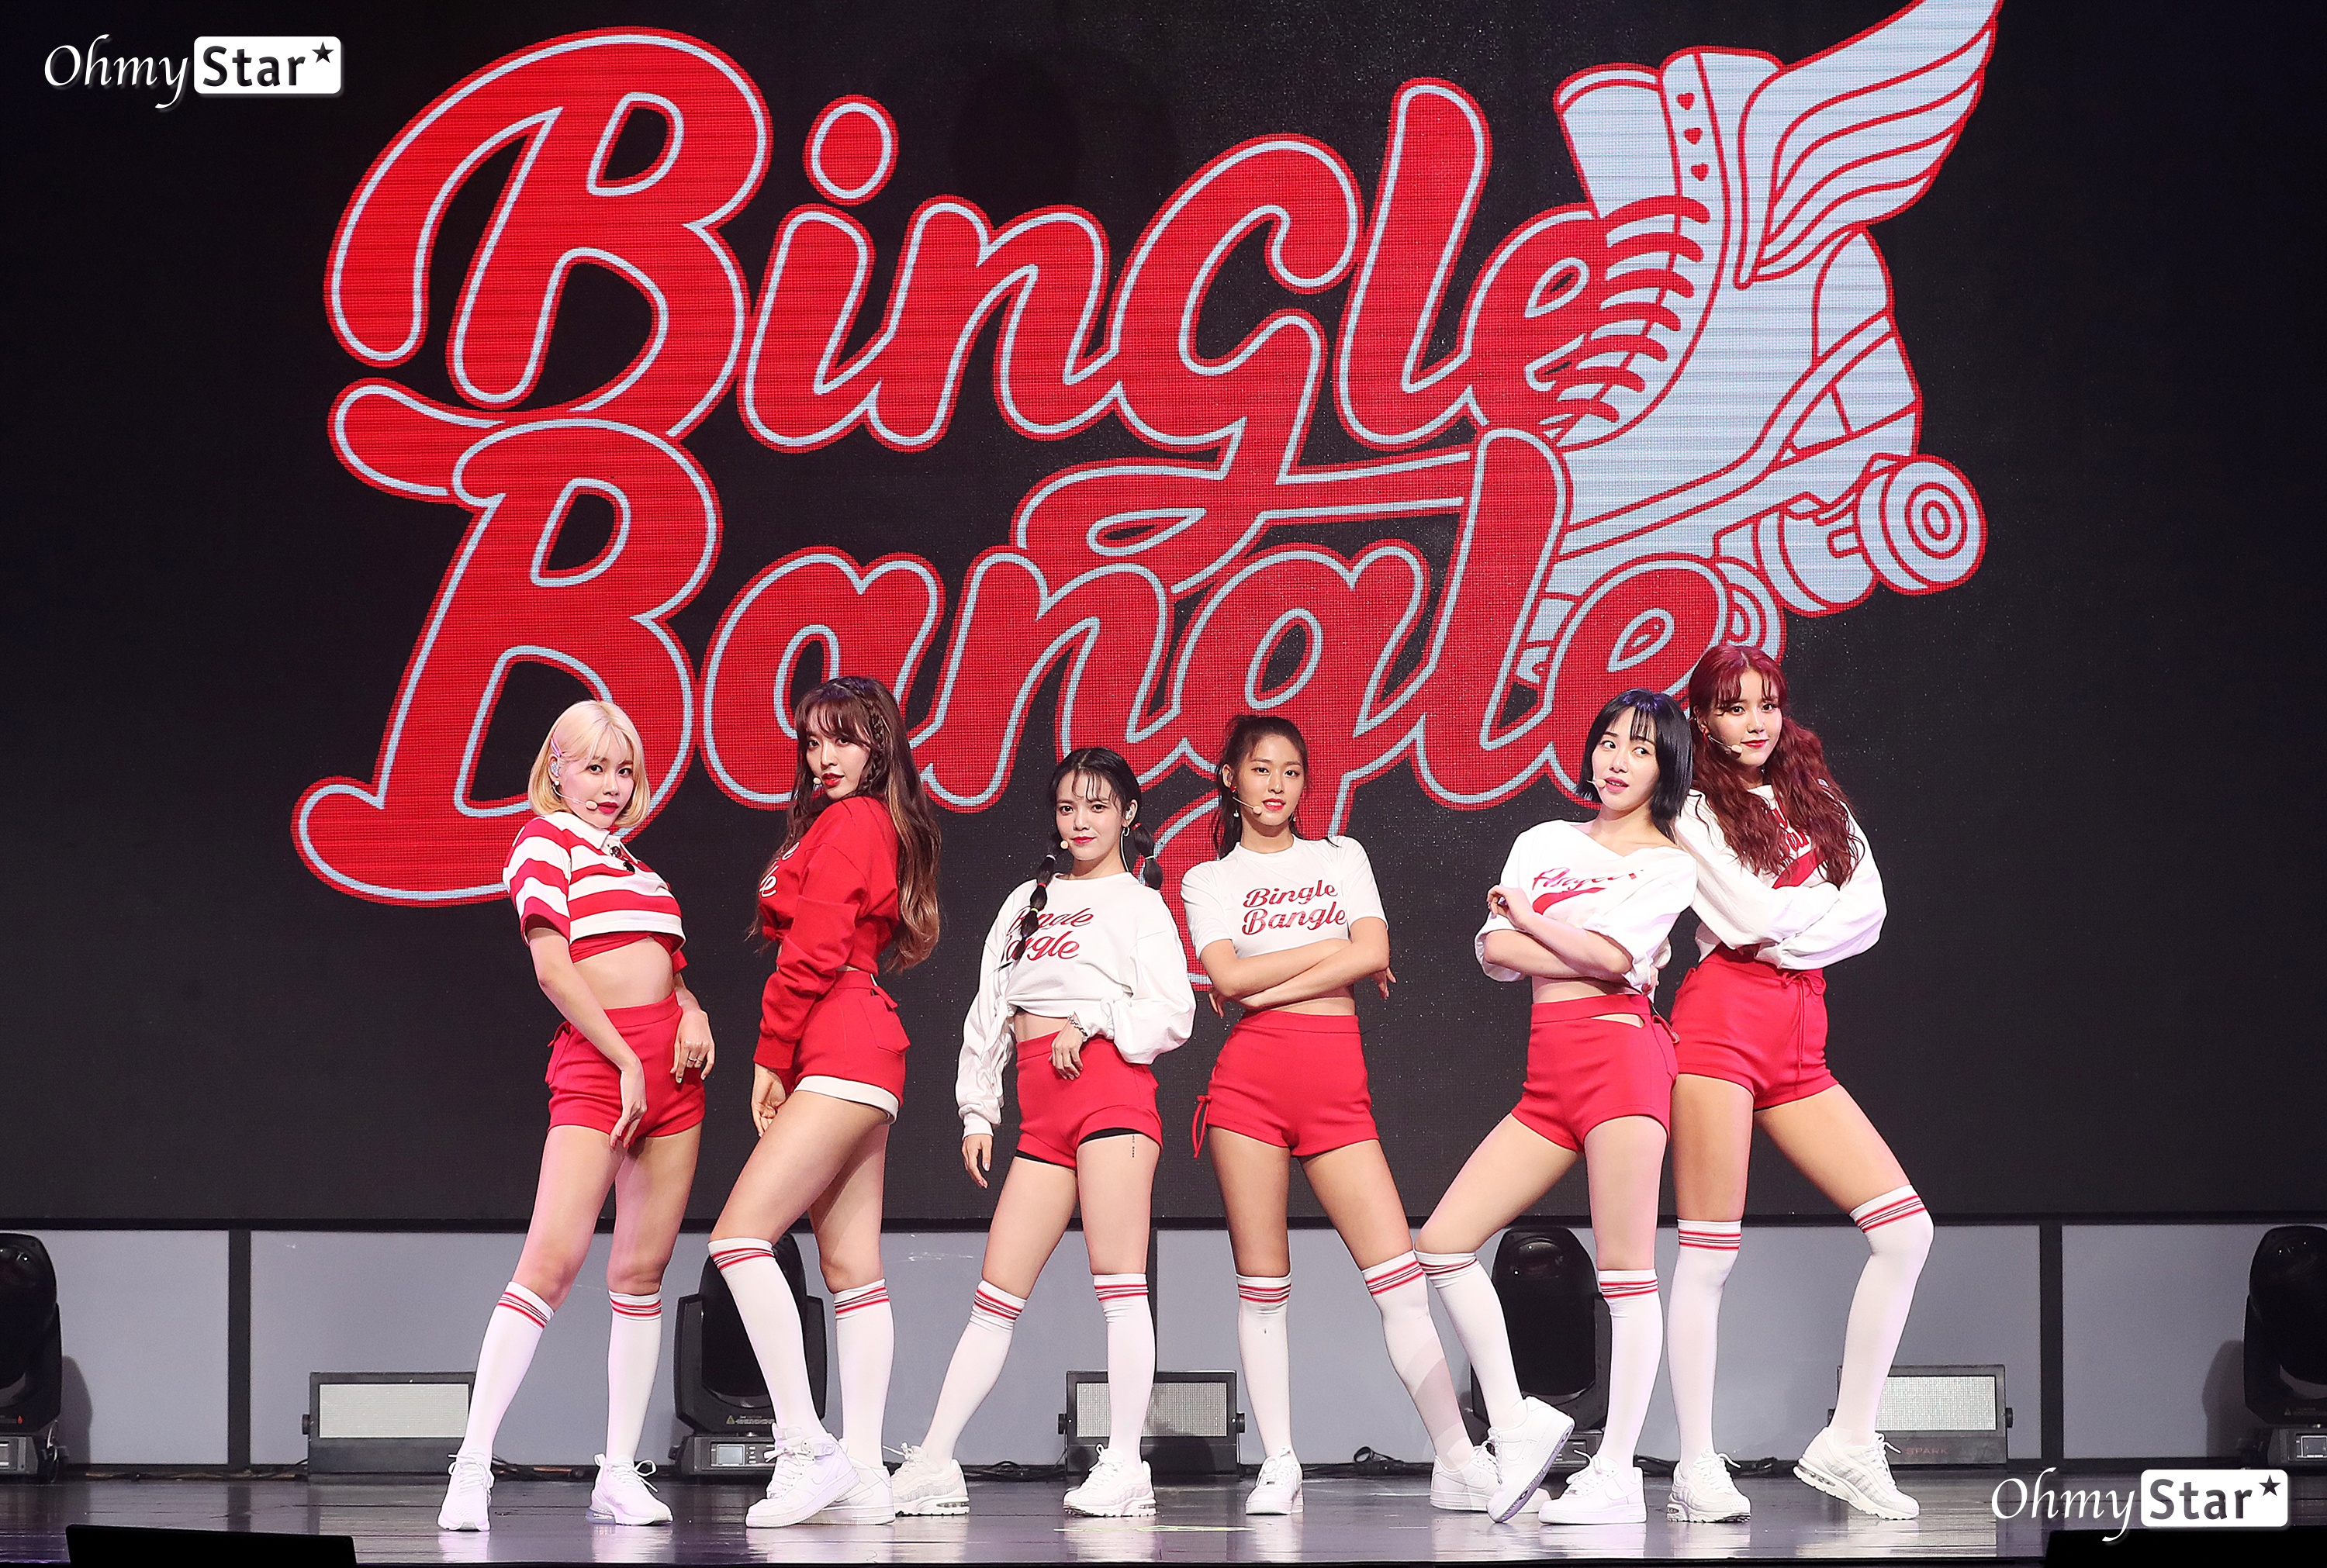 The AOA regrouped into a six-member group and returned after a year and five months; those who had been seven to six as the main vocal Park Choa withdrew gathered energy to show a tighter look.On the afternoon of the 28th, AOAs mini 5th album <Bingle Bangle> was released at a concert hall in Gwangjin-gu, Seoul.A refreshing summer song brought a comeback, a healthy charmAOA, who returned to a cool and addictive summer song, showed the stage of the title song Bingle Bangle and the song Super Duper on the showcase.Now the summer starts, I hope you play our cool song and drive and have a good summer, Yuna said.This song is full of health, Mina said. The members did not fall out and exercise a lot.Hyejeong also said that he was happy to show such health beauty. We used to sing a lot of mature songs before, but I wanted to show a lot of brightness when I came back.I feel good to be able to listen to a bright song that suits my 20s, he added.To show their energy, they sweated more than before.I have been preparing for the album for a long time, so I personally prepared more excitingly, said Seolhyun. The preparation process was difficult, but it was a pleasant process that became hard, and there was a lot of practice, and I started practicing early morning like Idol Producer.Hyejeong also said, It is the hardest choreography so far, he said, I gave up my shoes and all the members wore sneakers.Weve all practiced really much together, as we went back to Idol Producer, and I think we did our best as we came back in a year and five months.Ive also made several correction recordings. (Yuna)I asked how I filled the gap of the main vocal Park Choa, which would have been quite large.Chan Mi said, Yuna sister also had a high proportion of vocals in the team. I filled the vacancy of Park Choa sister with Yuna sister and Hyejeong sister.I talked a lot about what I should do so that the stage of the six people would not look empty, he said.Chan Mi, who has been steadily receiving vocal lessons since the past, has also participated in this album as a vocalist rather than rap.seventh year group jinxI dont think seven years is a short time, but now Im so excited and funny to be active that I want to entertain this activity rather than worry.I think well spend a lot of time with the members and talk about our seven years when the time comes. (Chan Mi)When did you feel like you grew up as a seventh-year AOA?Chan Mi said, I felt that I grew up practicing this time. It used to take a long time to dance, but now I catch it hard and it fits in a short time.When I sing, when I see my sisters, I feel like Im really good at seeing Baro understand and express it and make a sound source better than the guide.Members now seem to know each other, even if they dont speak like old family or friends. Whos in bad shape today? You can see whos sick today.Im so happy when were alone, even if we start talking without a theme, its a long time fun. (Jimin)the answer to the words of the publicSeolhyun recently asked about the cancellation of SNS follow.Previously, Seolhyun followed the Luna of F-X, who unfollowed Yoo Ah-in, Yoo Byung-jae, IU, etc. and expressed his intention to support feminism, and was mentioned in the category of feminism-related issues.I actually thought I had a lot of followers, said Seolhyun. I thought I should sort out my followers besides my acquaintances that day, but I stopped Baro when I heard that it was an issue.After that, I was nervous and I could not touch it, he said.Then, in an interview that came out before it became an issue, it was once again an issue that I said I was interested in womens human rights.In response to this additional question, Seolhyun said, I am naturally interested in social issues and I am trying to listen to various opinions.AOA Mini 5th album <Bingle Bangle> Showcase .. Summer song Bingle Bangle comeback